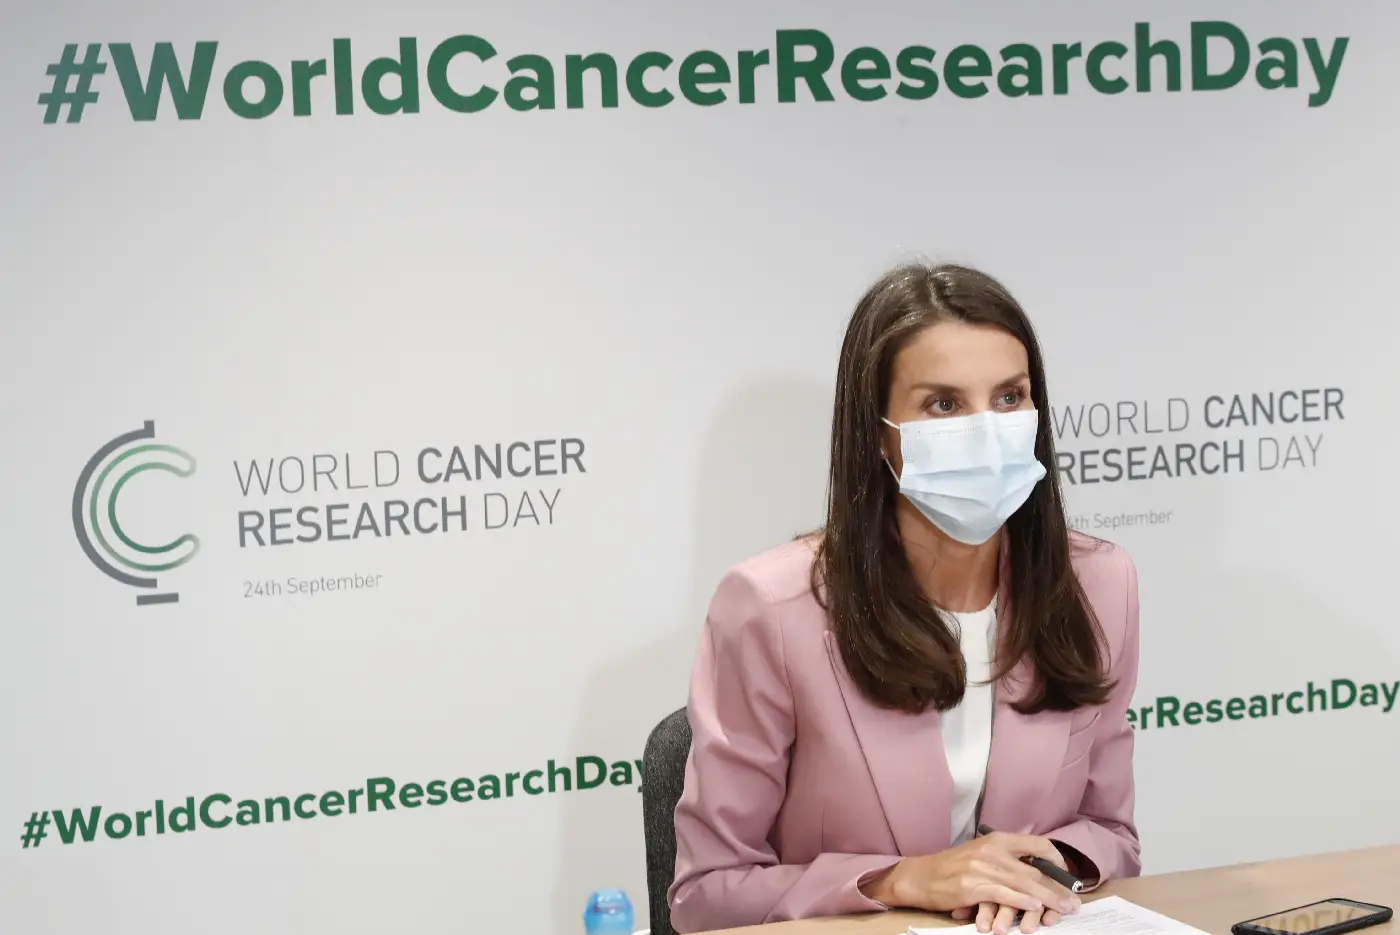 Queen Letizia of Spain wore pink suit from Boss for Cancer Research Day event